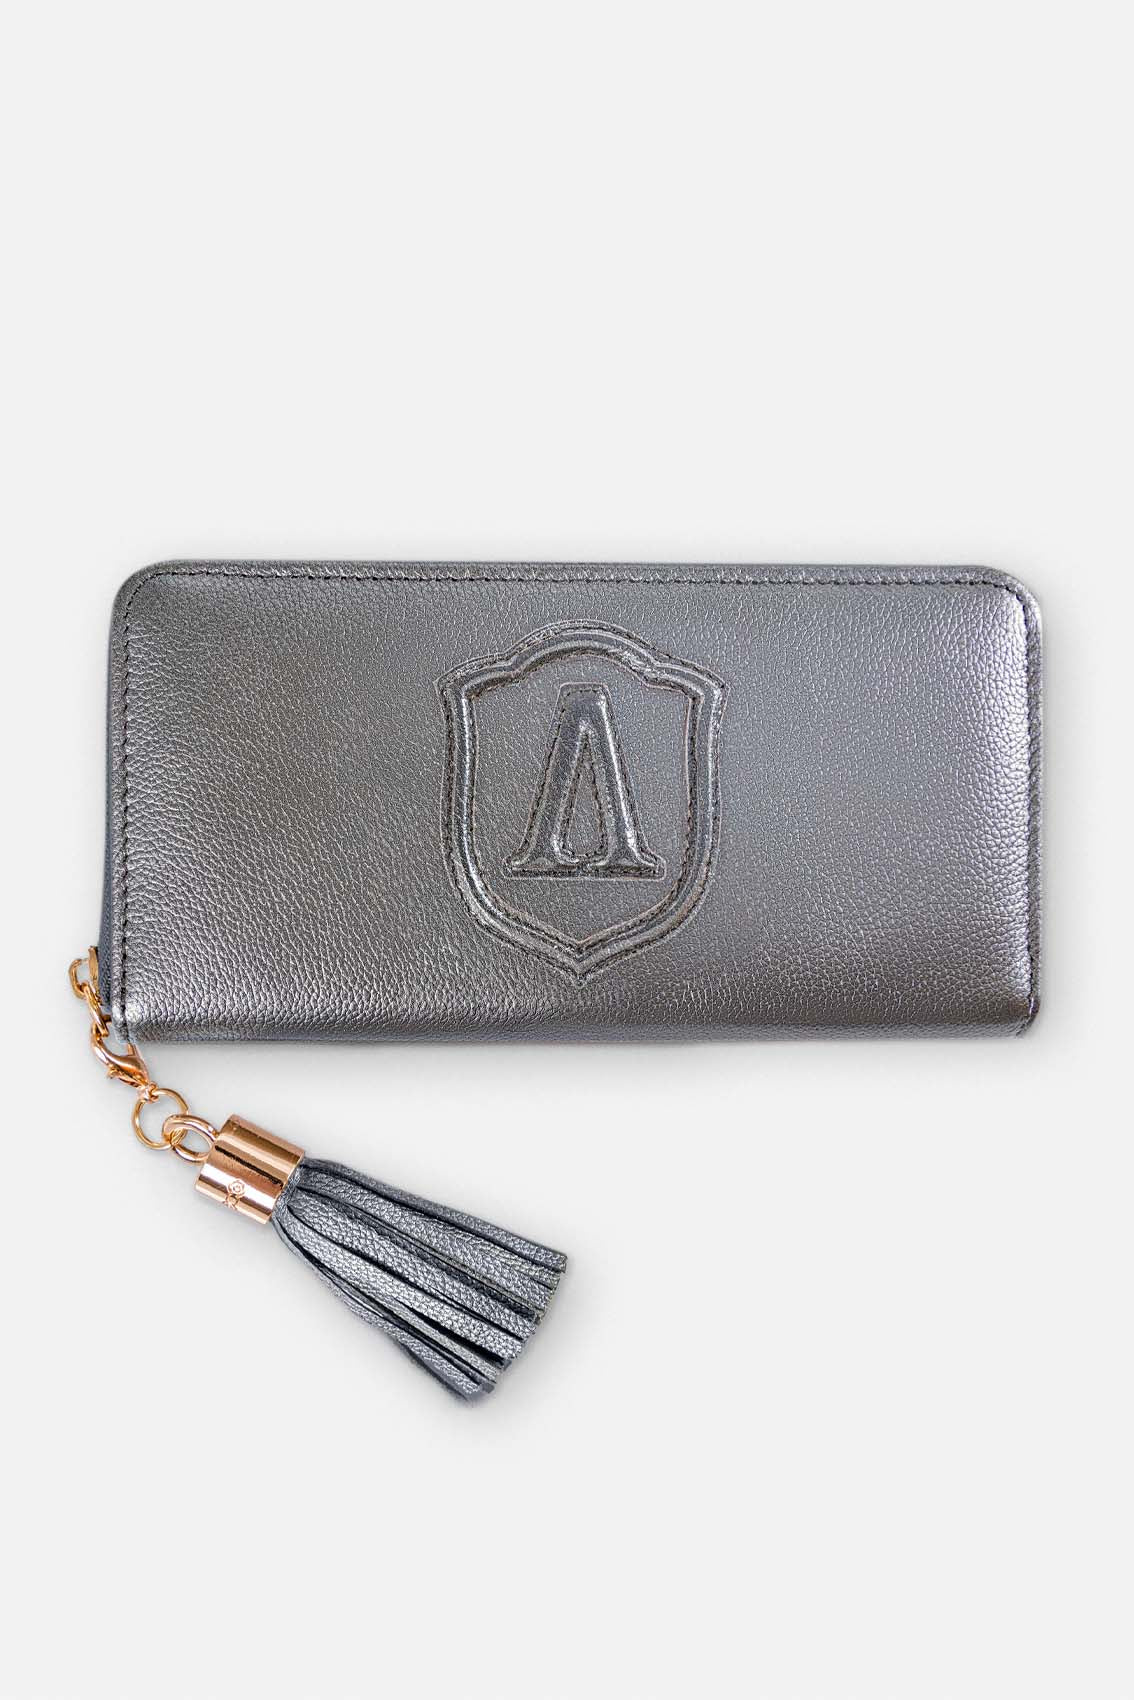 Wallet made of leather with AVE shield and tassel